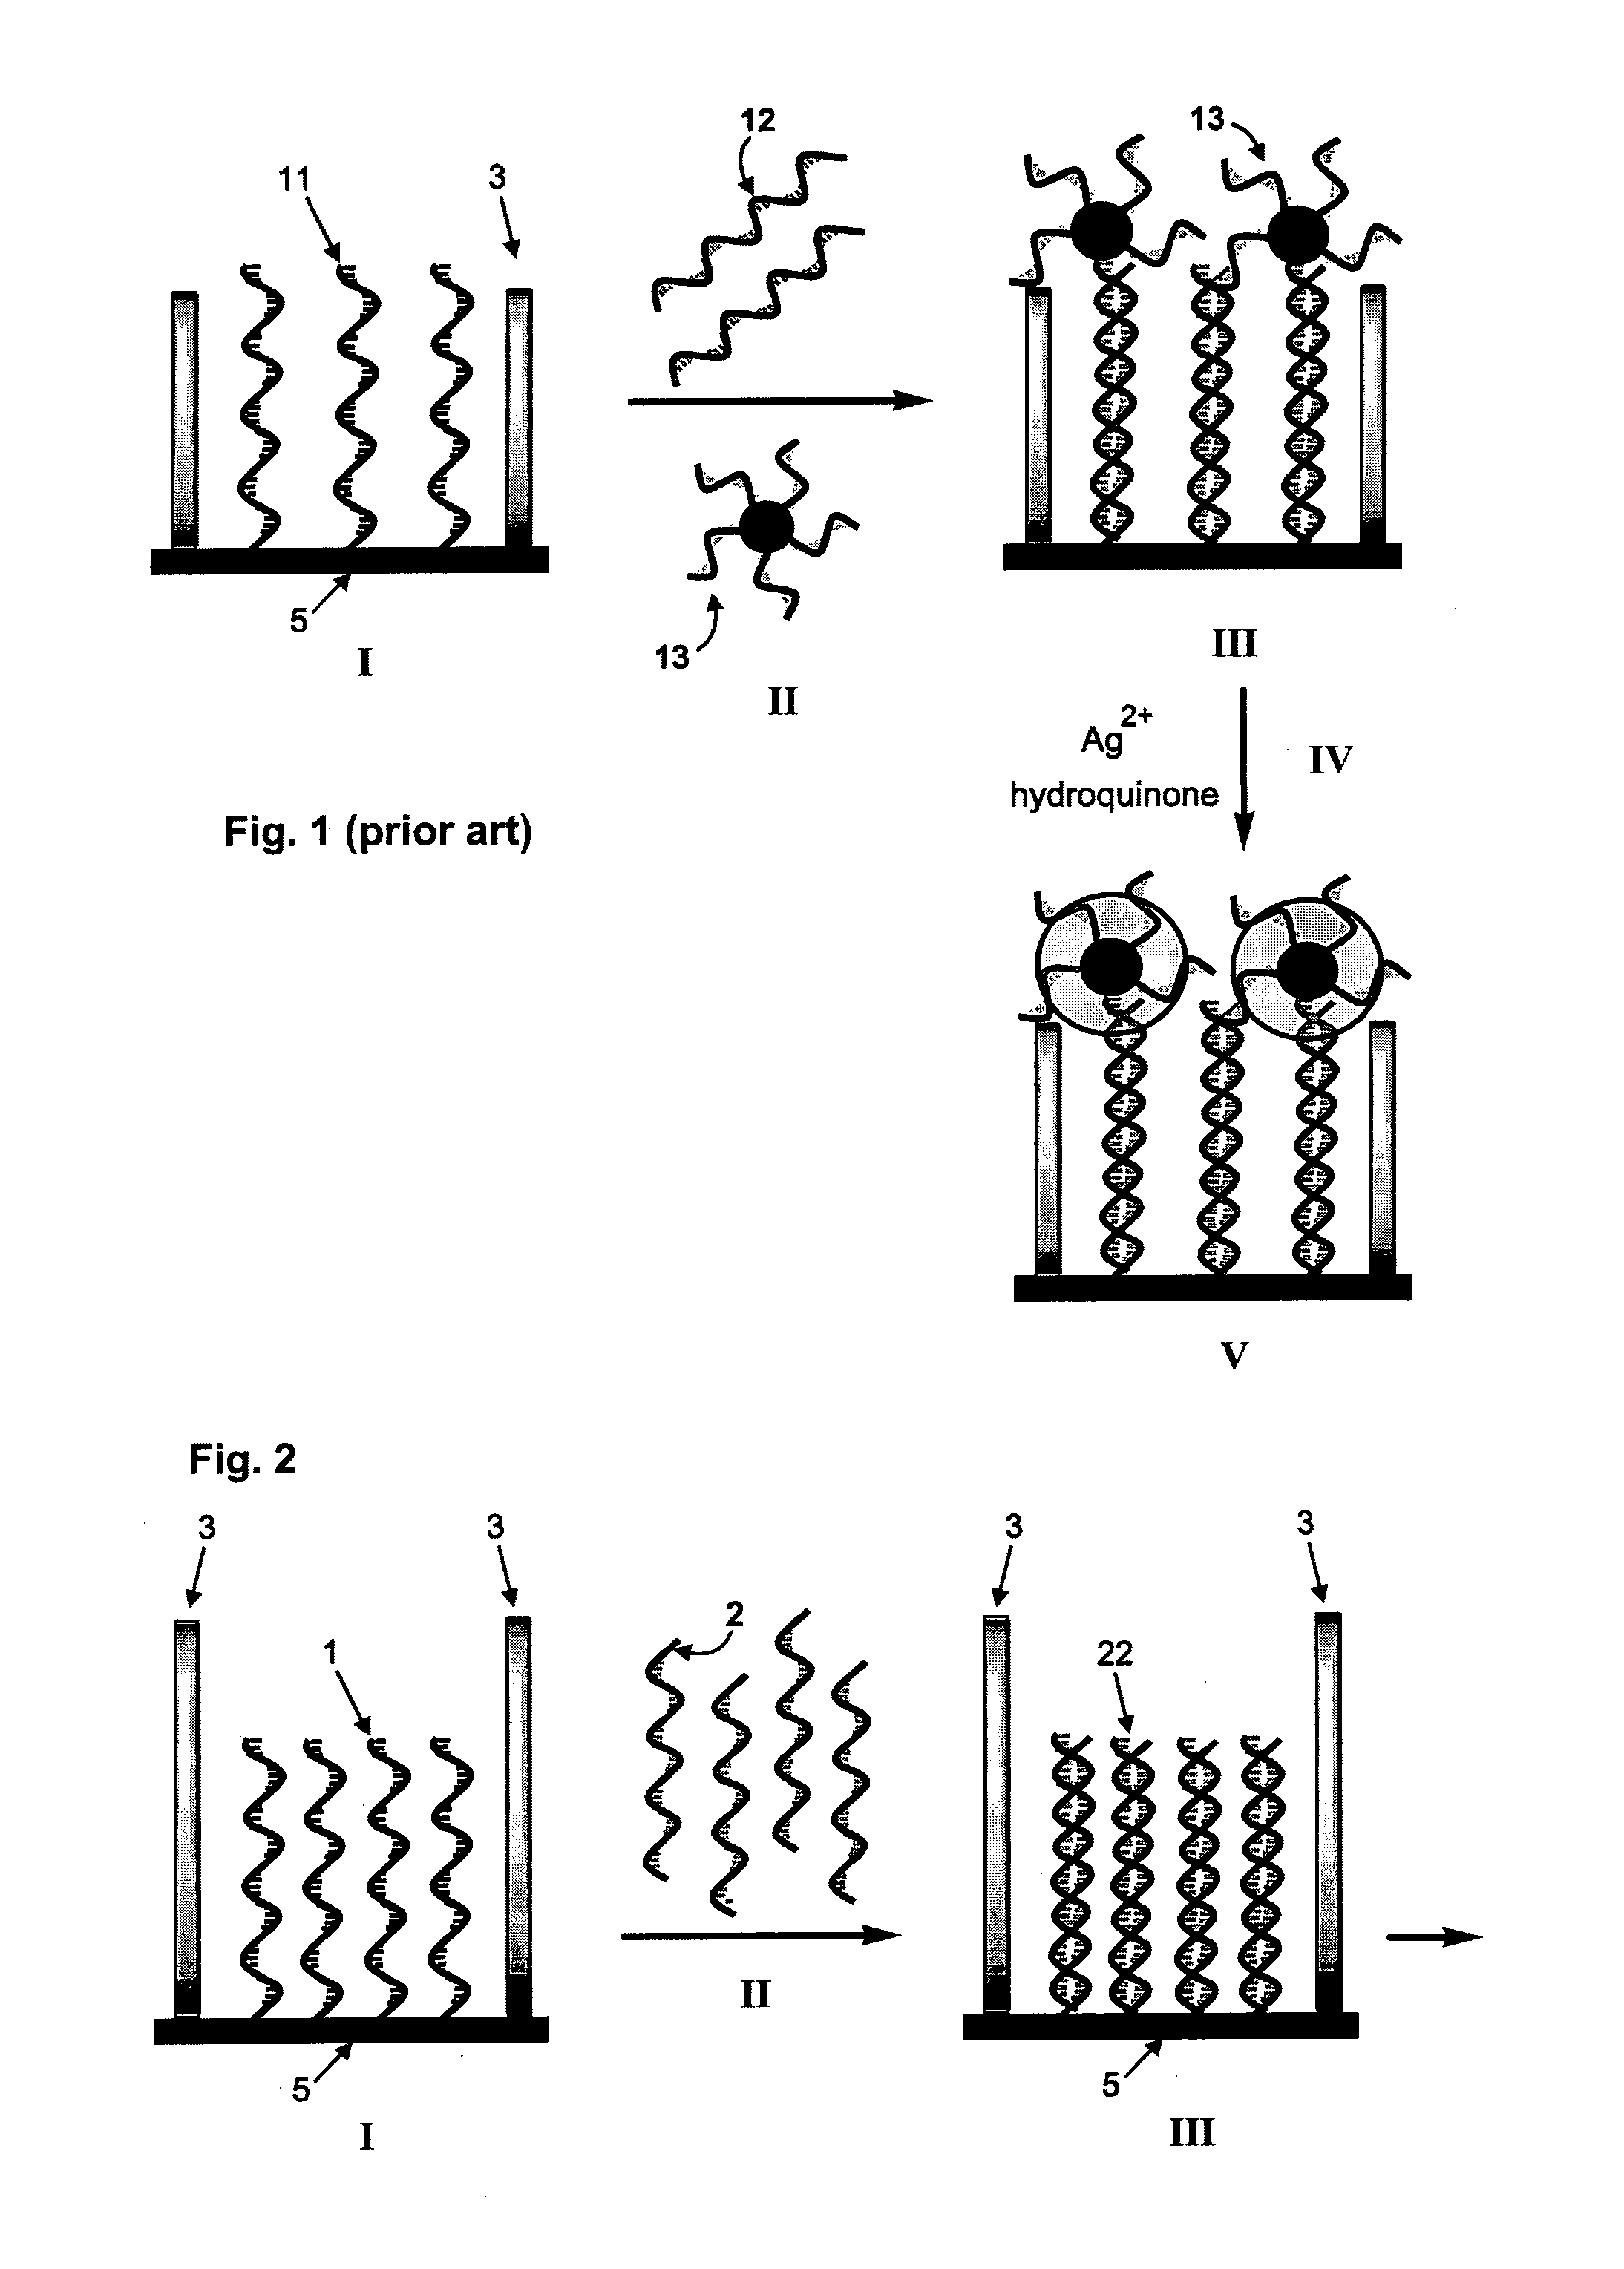 Method of electrically detecting a nucleic acid molecule